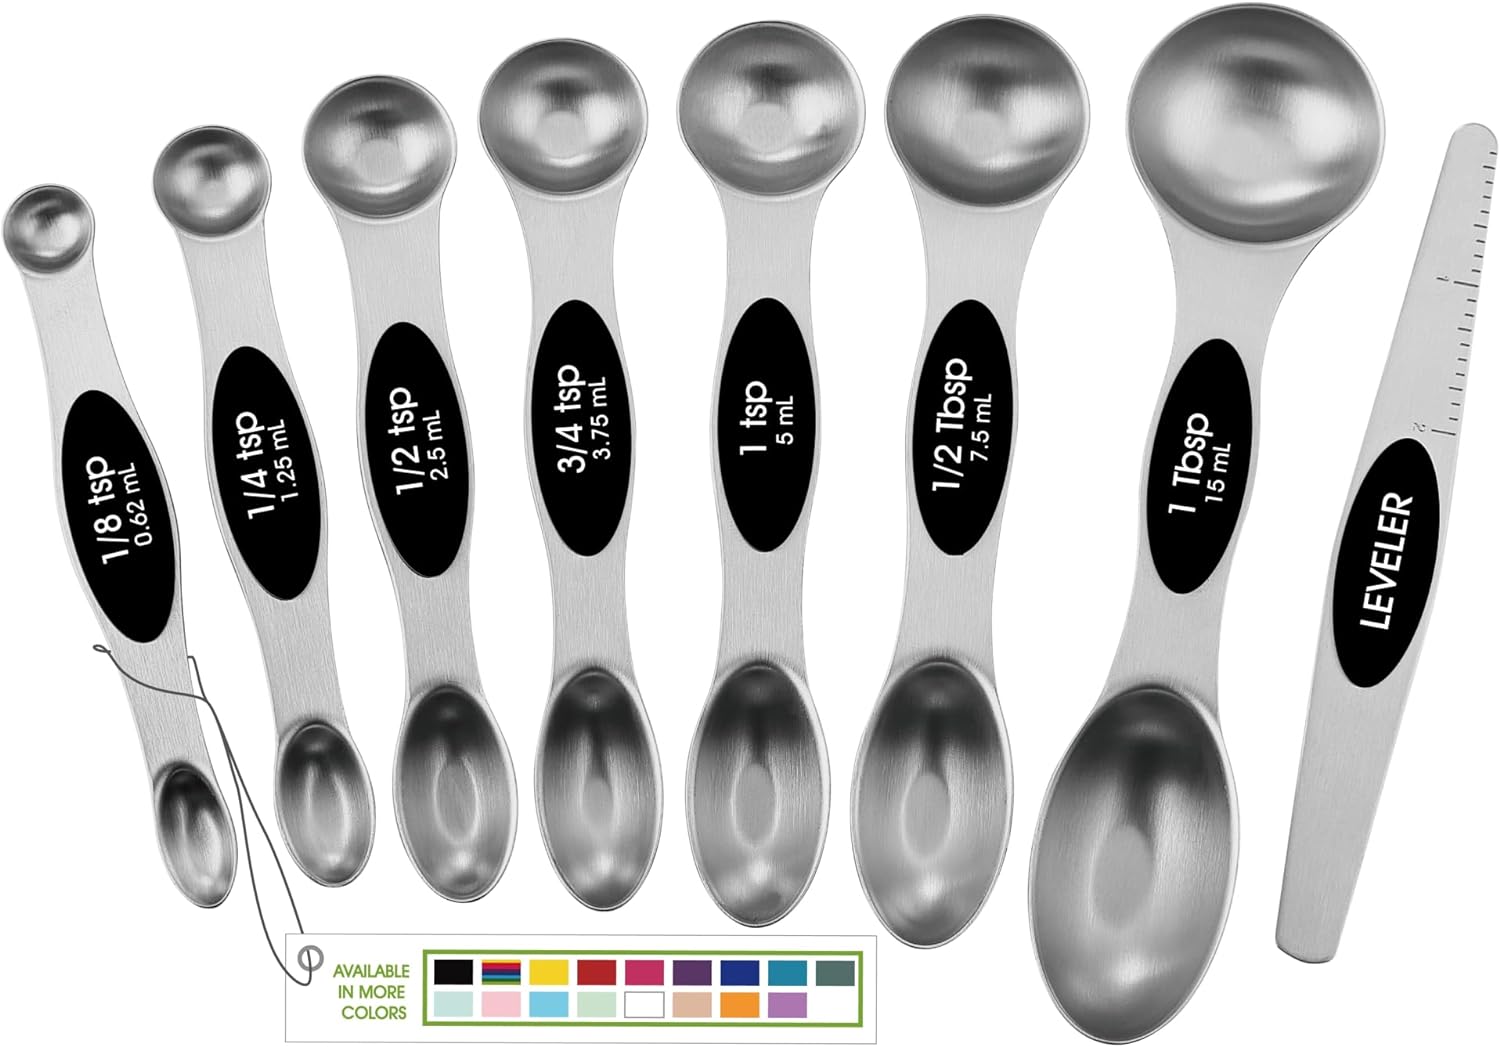  Spring Chef Magnetic Measuring Spoons Set 